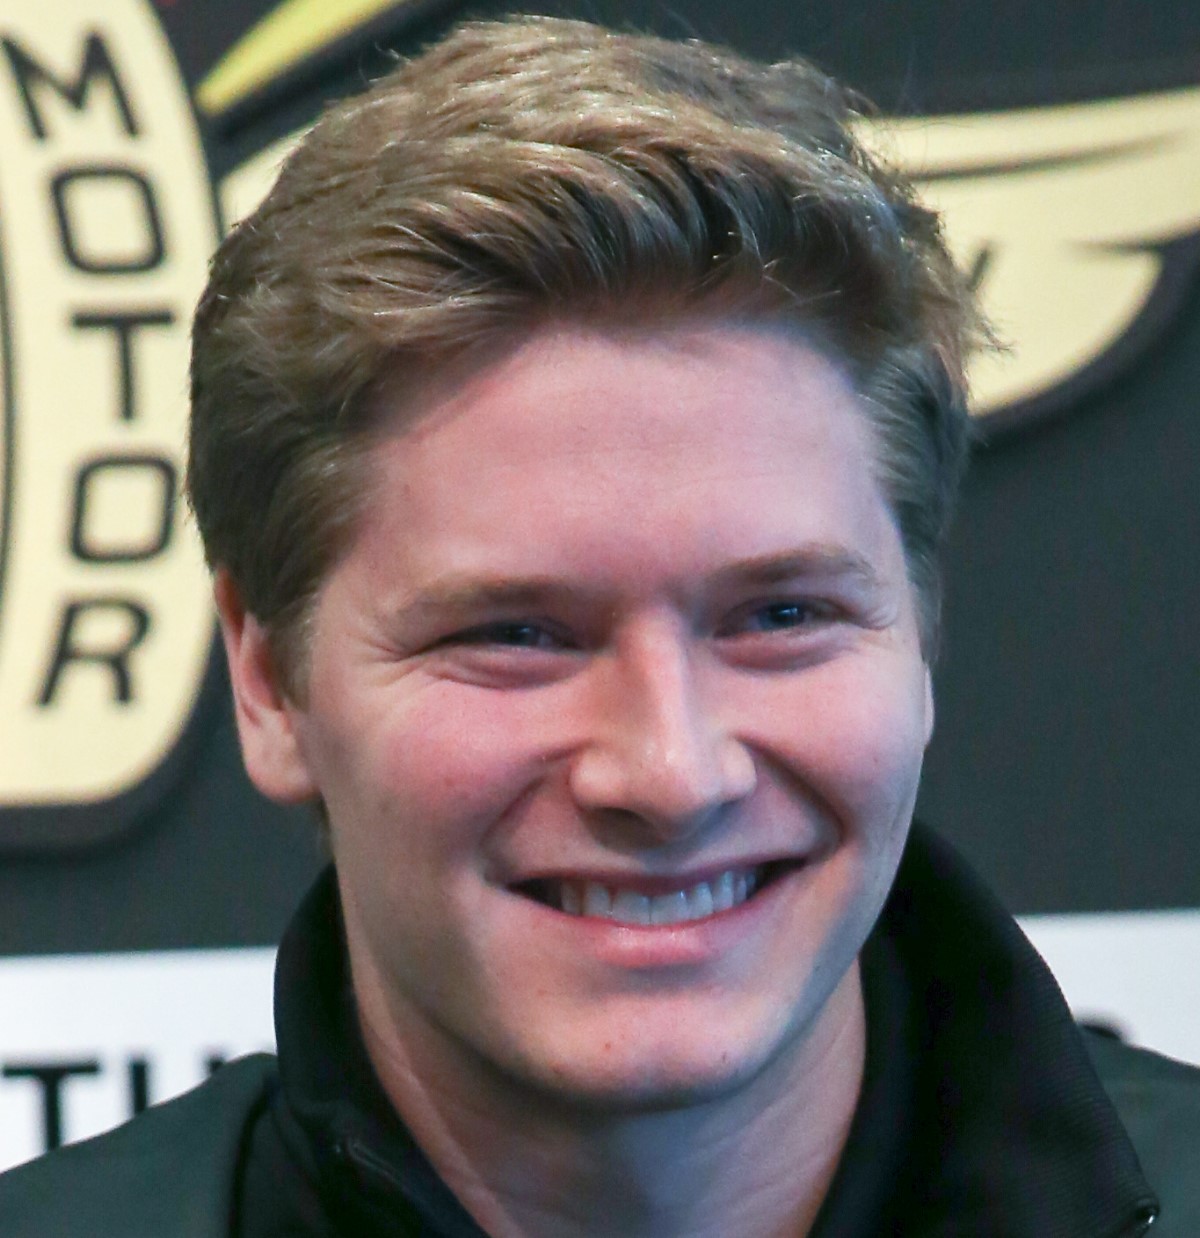 Newgarden had better stick to driving